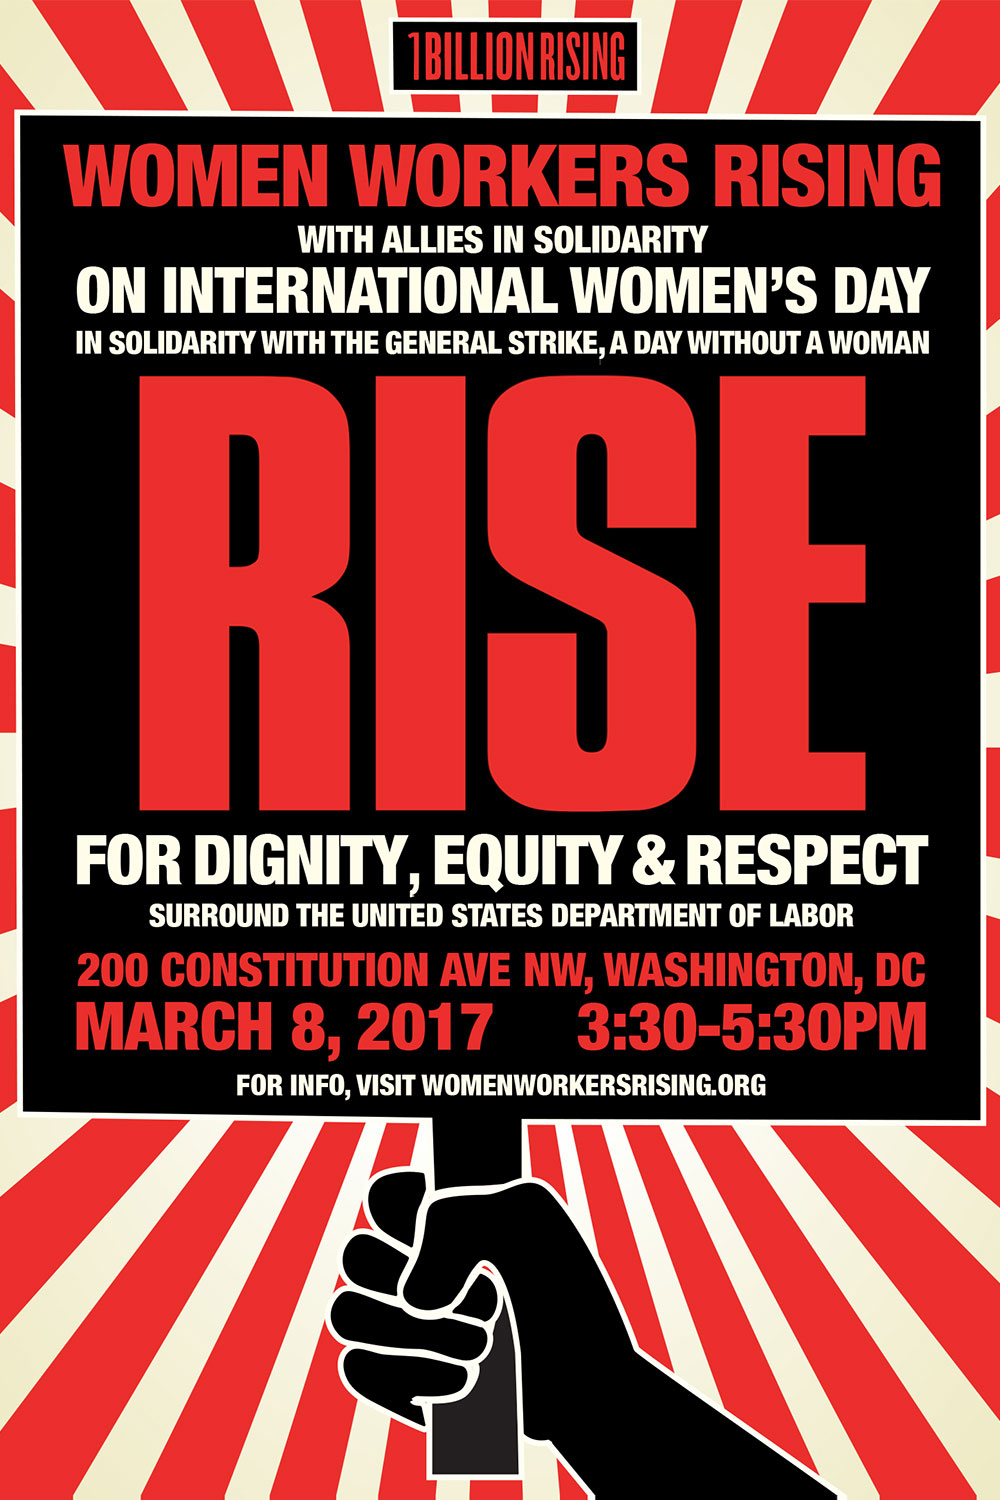 CLIENT:V-Day

DATE:March 2017

PROJECT:Poster for women worker’s rally